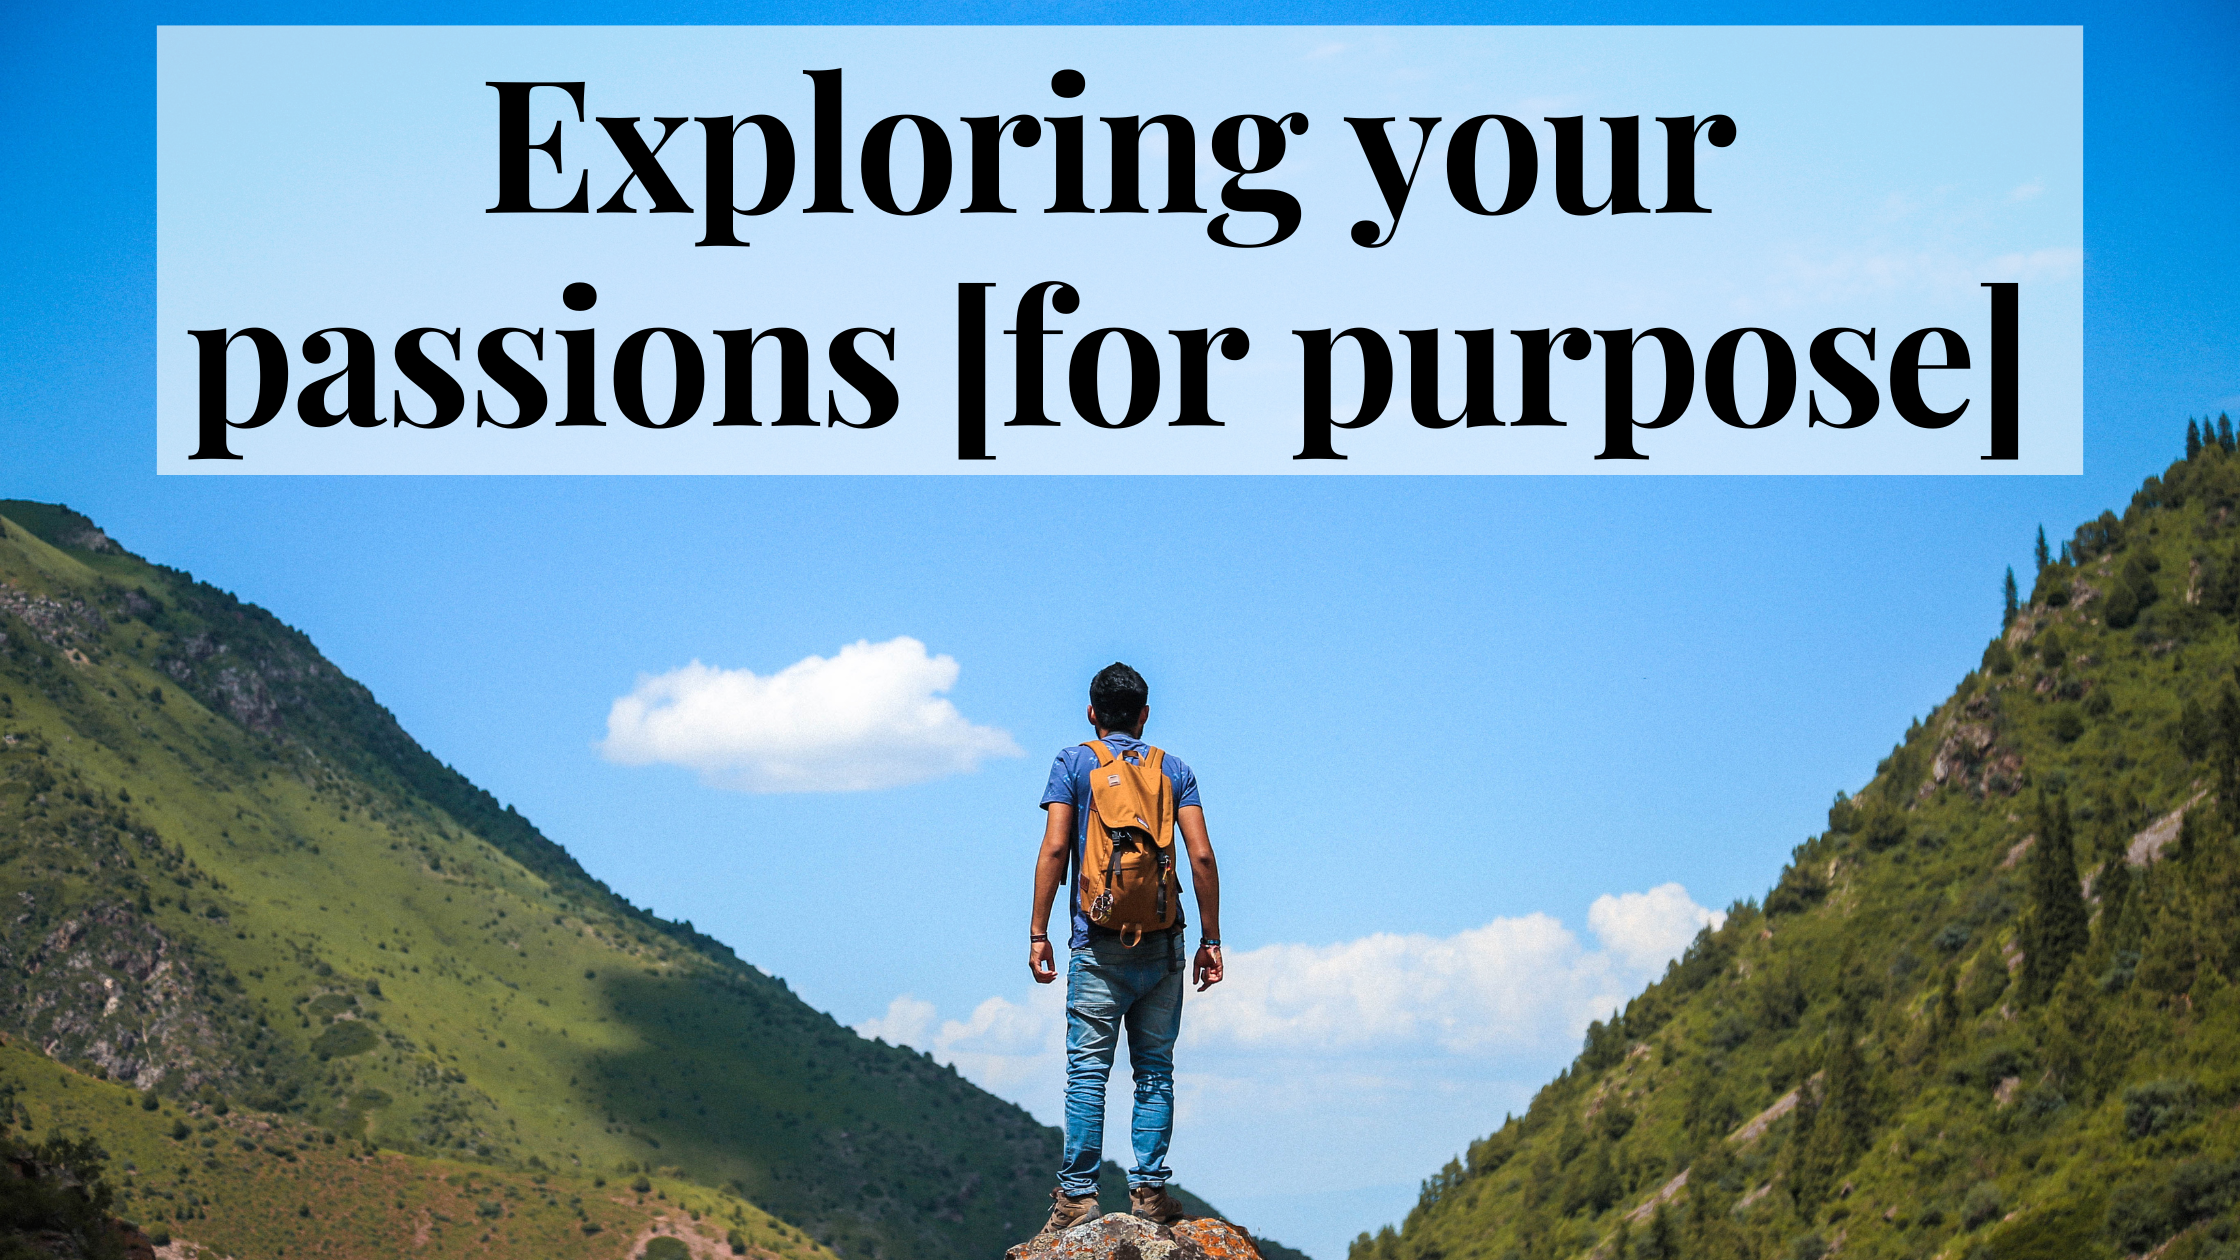 Exploring your passions [for purpose] - Allround Achievers